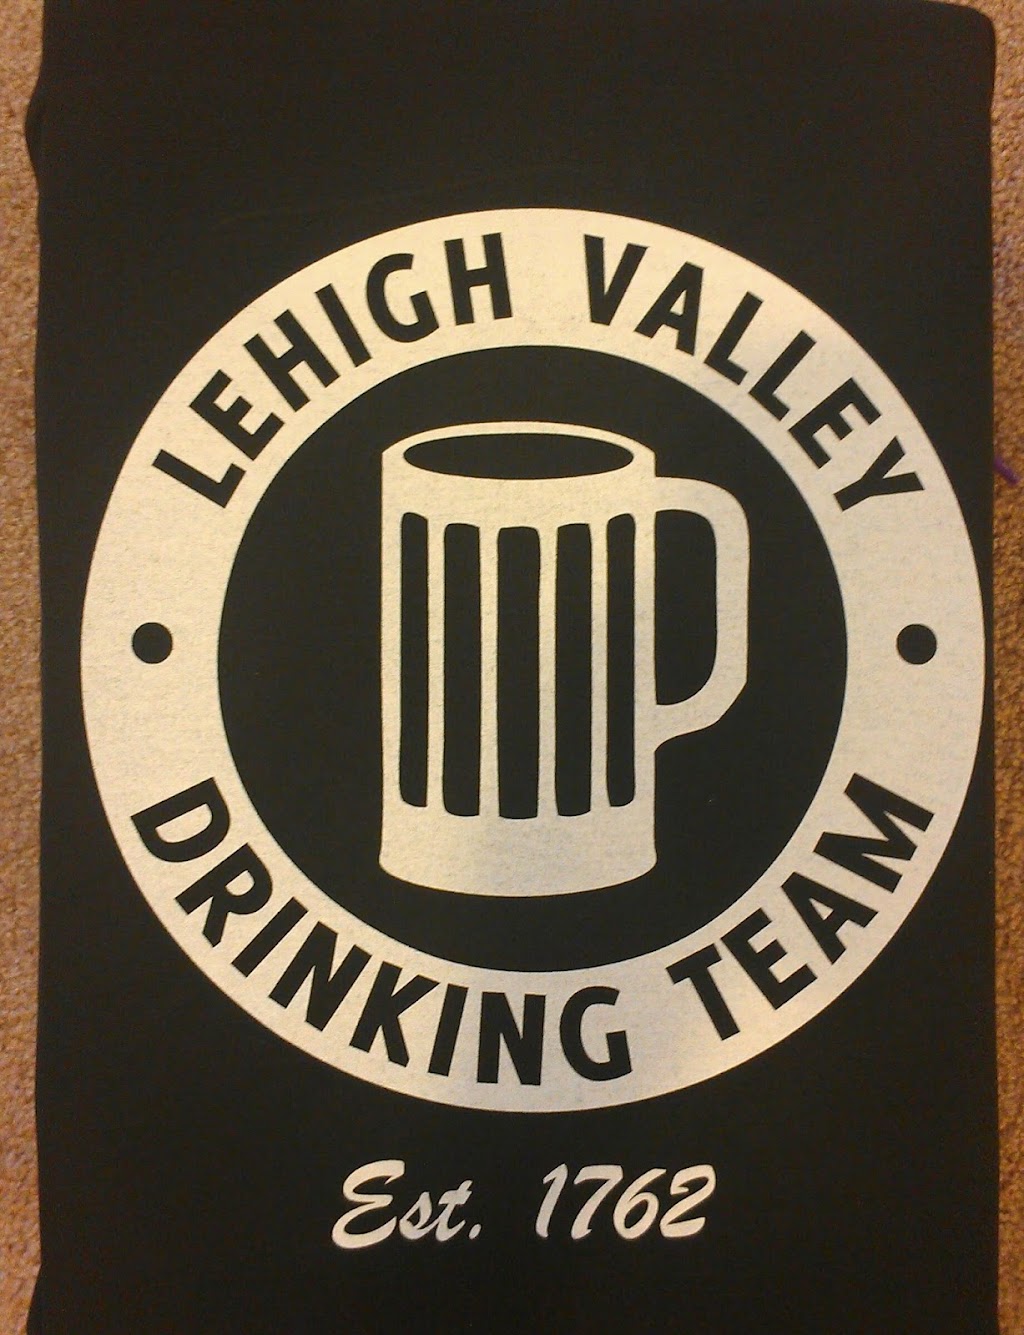 Lehigh Valley Printing | 4140 Airport Rd, Allentown, PA 18109 | Phone: (610) 443-0257